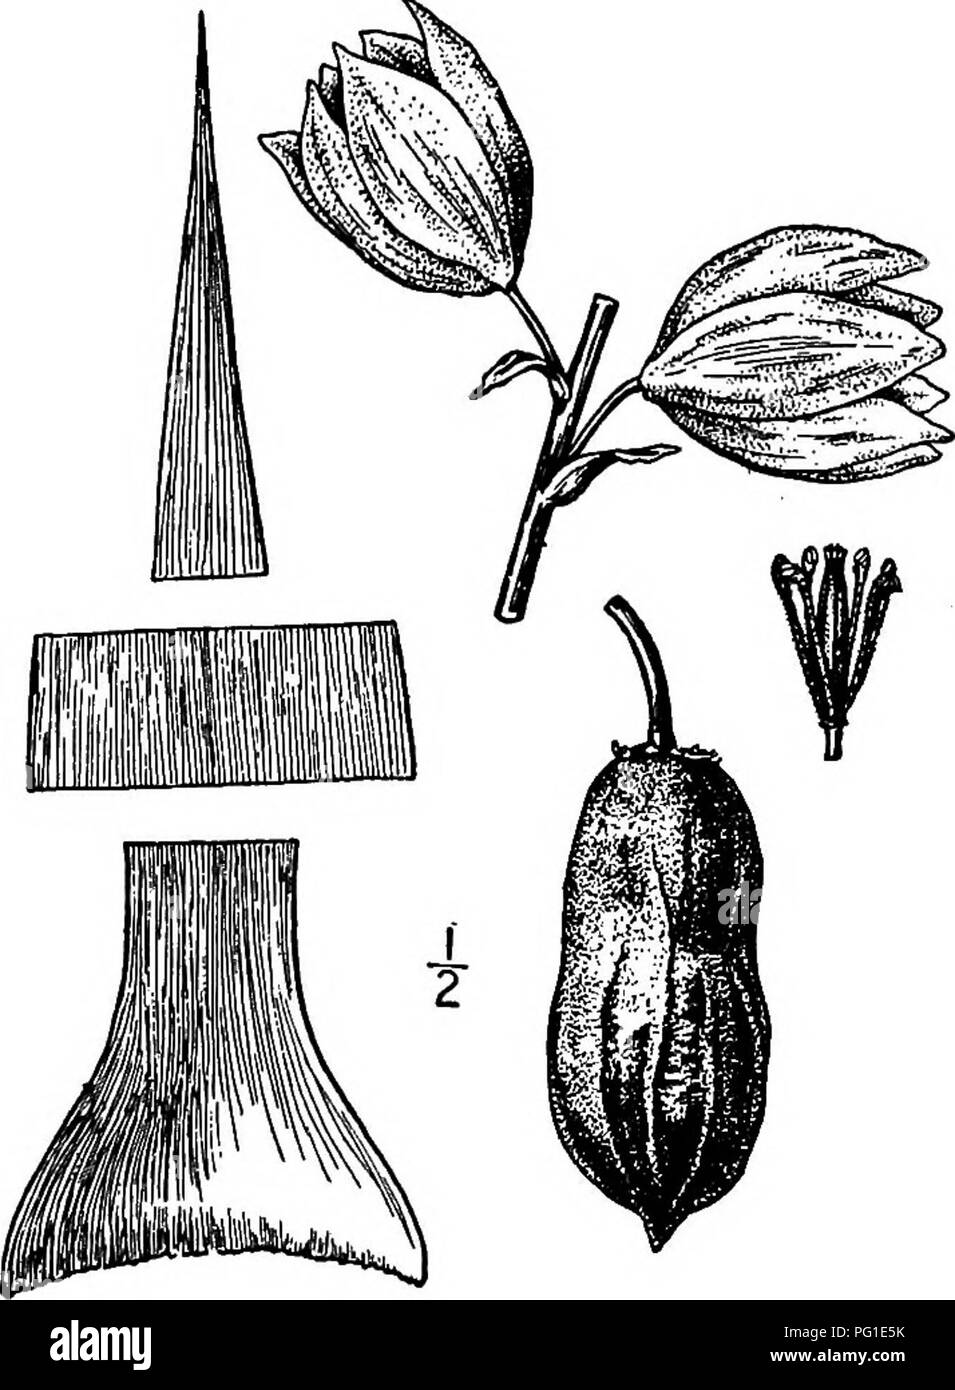 . North American trees : being descriptions and illustrations of the trees growing independently of cultivation in North America, north of Mexico and the West Indies . Trees. Spanish Bayonet 153 length; the bracts are thin and white, the flowers are stalked, drooping, their perianth beU-shaped, 8 to 12 cm. broad, thin and white; the segments are but slightly united at the base, ovate or ovate-lanceolate, narrowed into a bluntish tip and hairy at the apex, the outer series merely sharp-pointed and about half the width of the inner ones; the stamens are about as long as the pistil; the ovary is  Stock Photo